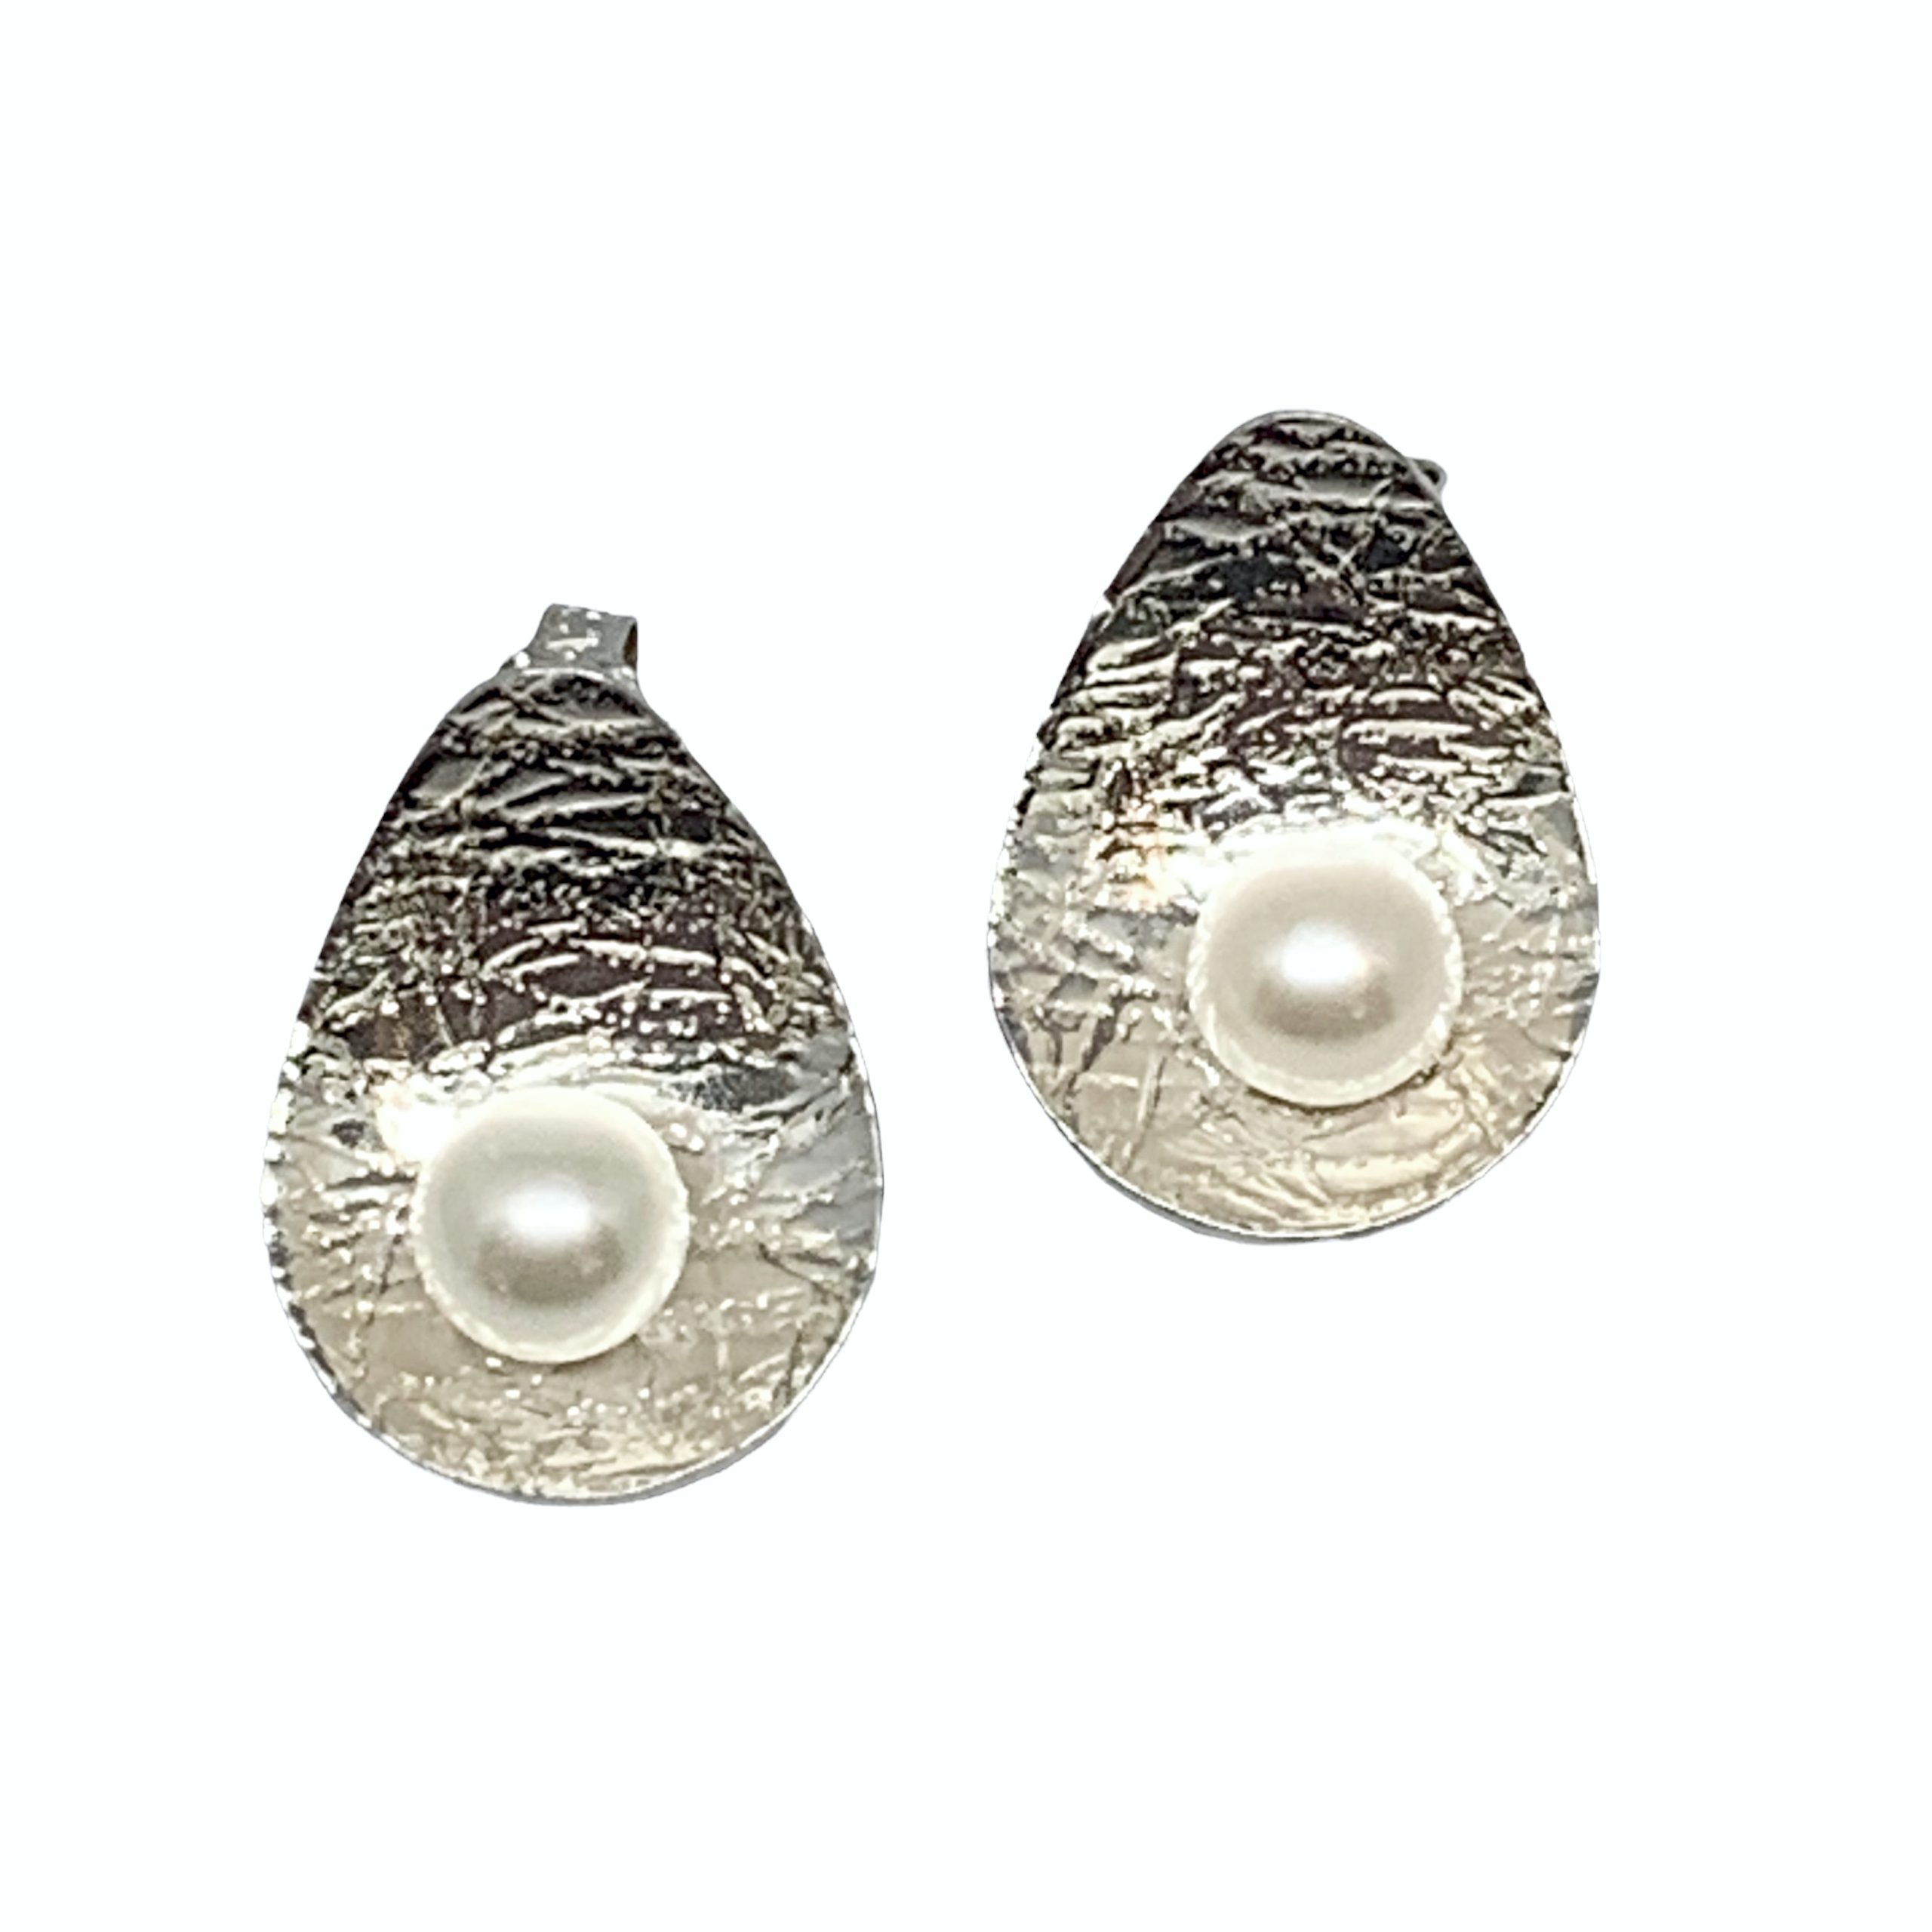 Handmade silver + pearl earrings by A&R Jewellery | Effusion Art Gallery + Cast Glass Studio, Invermere BC